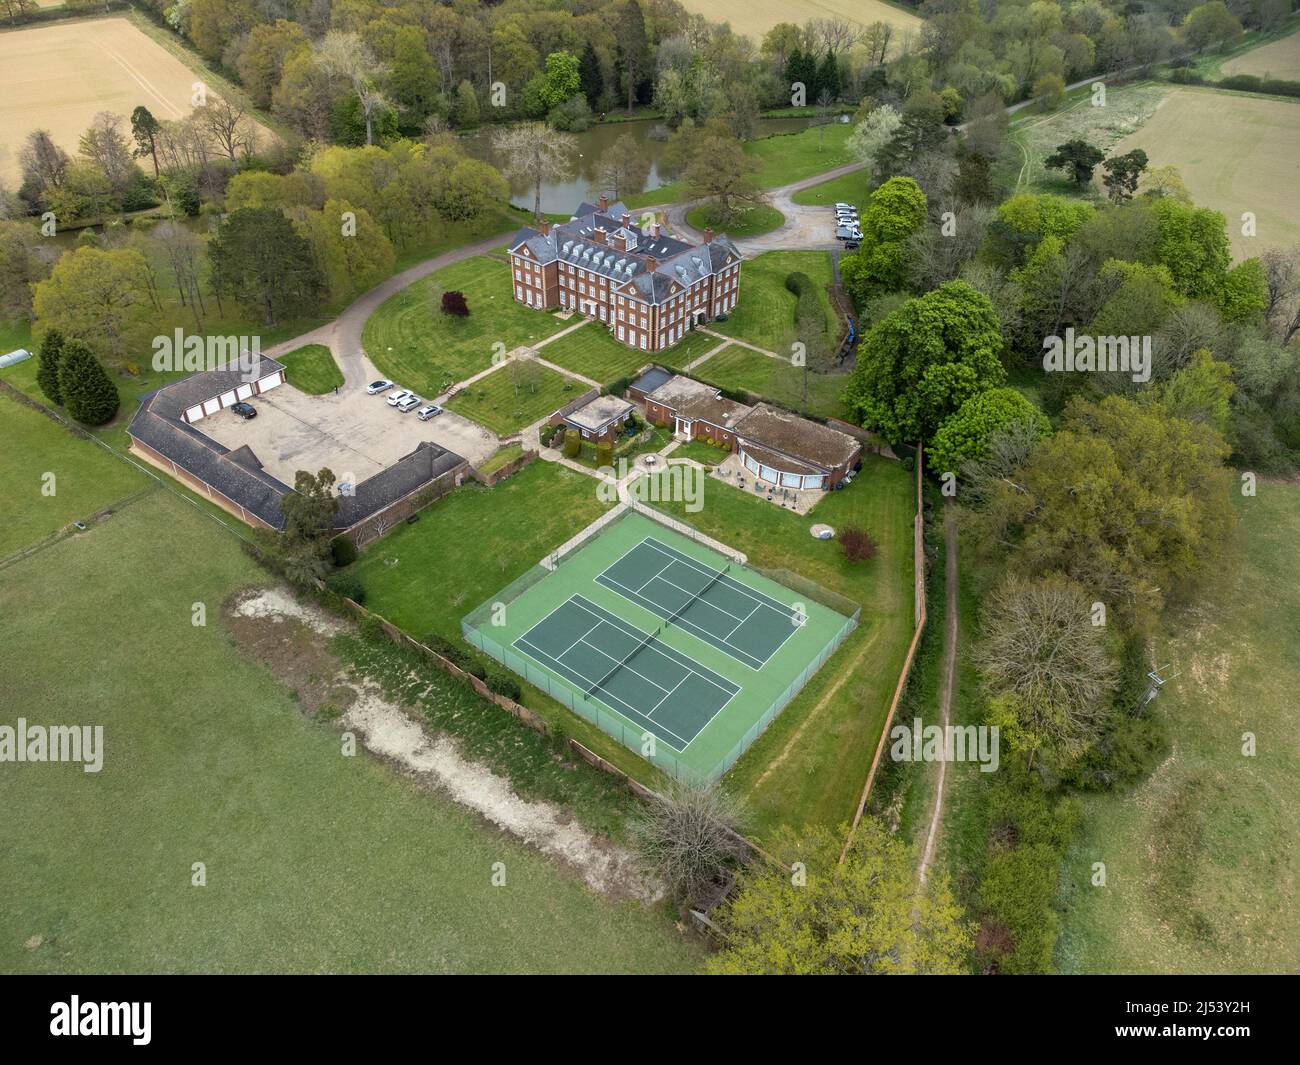 Warnham Manor Estate is situated in a beautiful rural location, surrounded by woodland and fields, on the outskirts of Warnham village Stock Photo